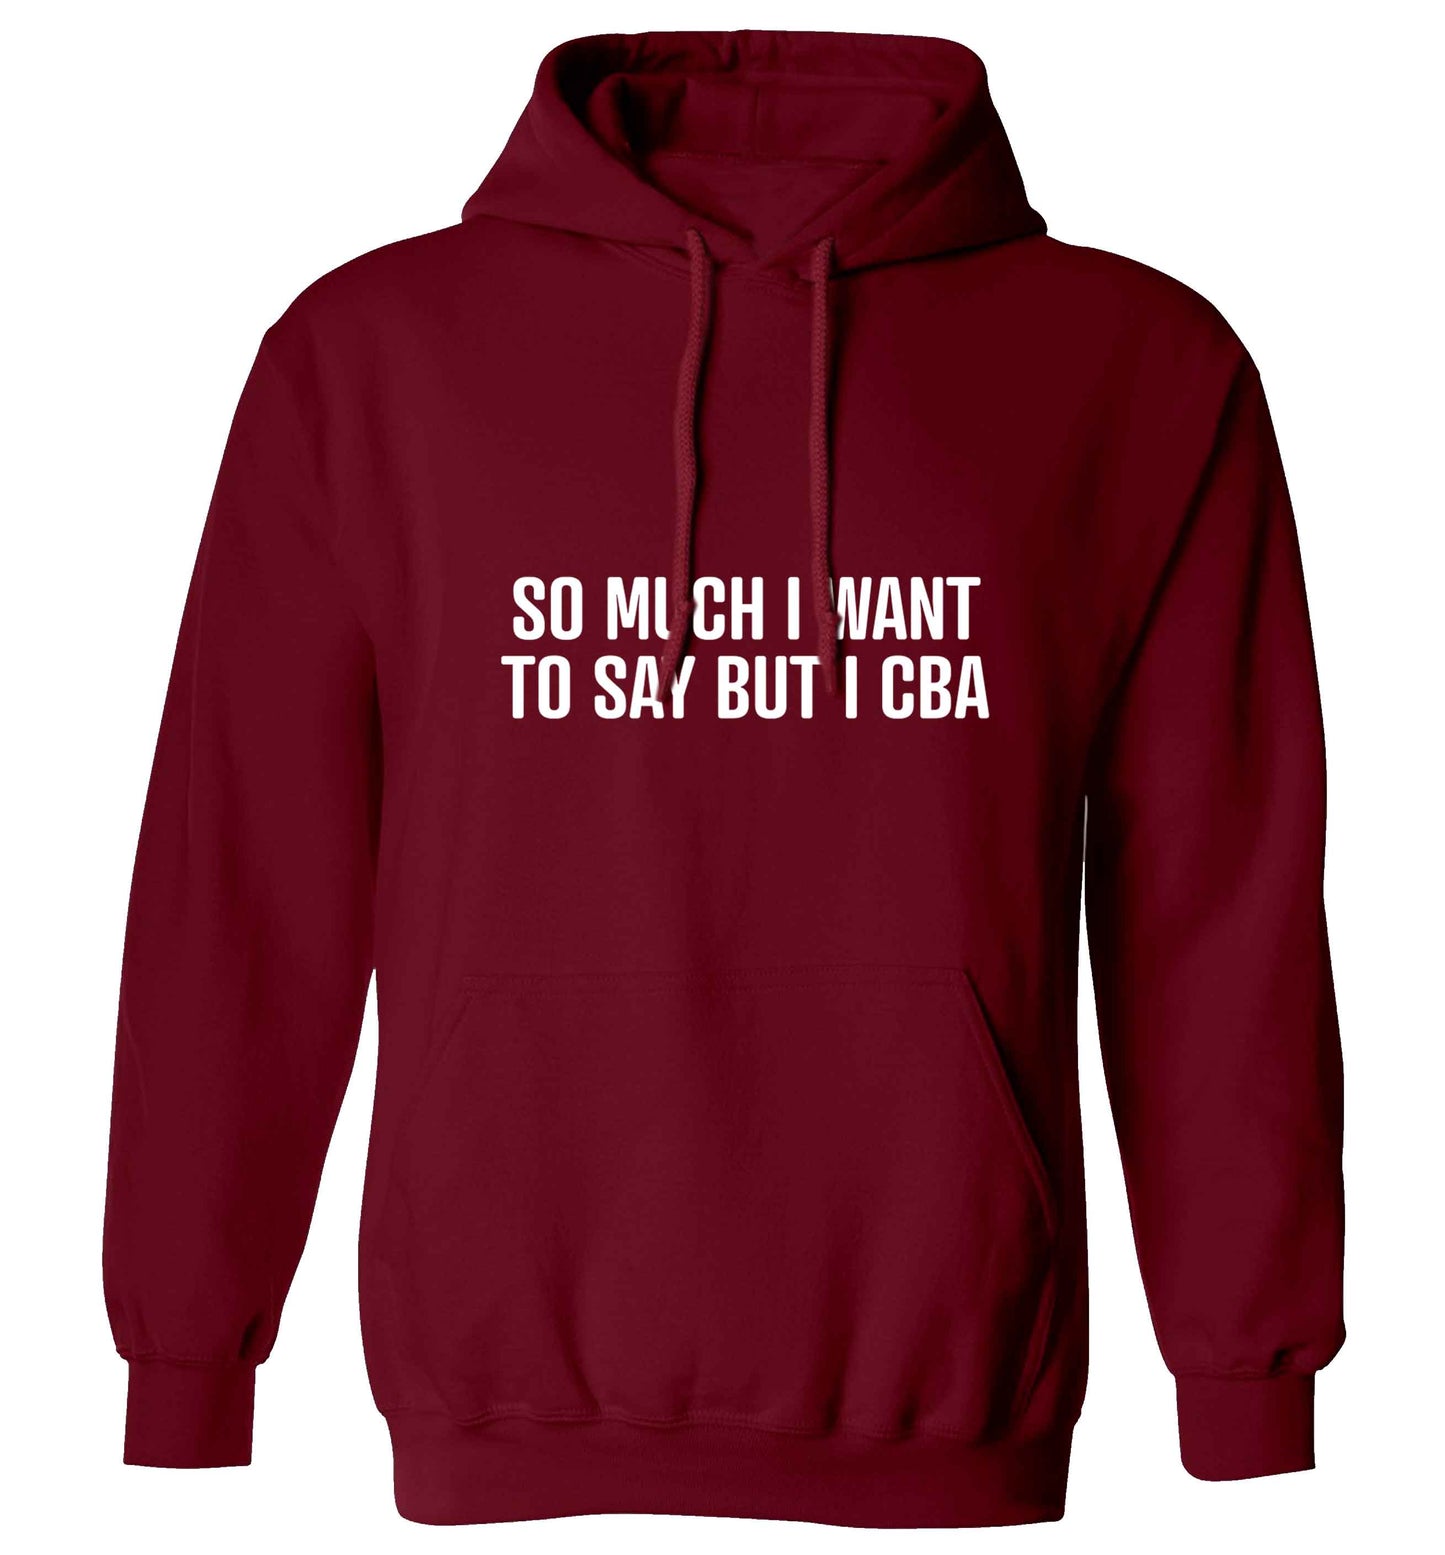 So much I want to say I cba  adults unisex maroon hoodie 2XL